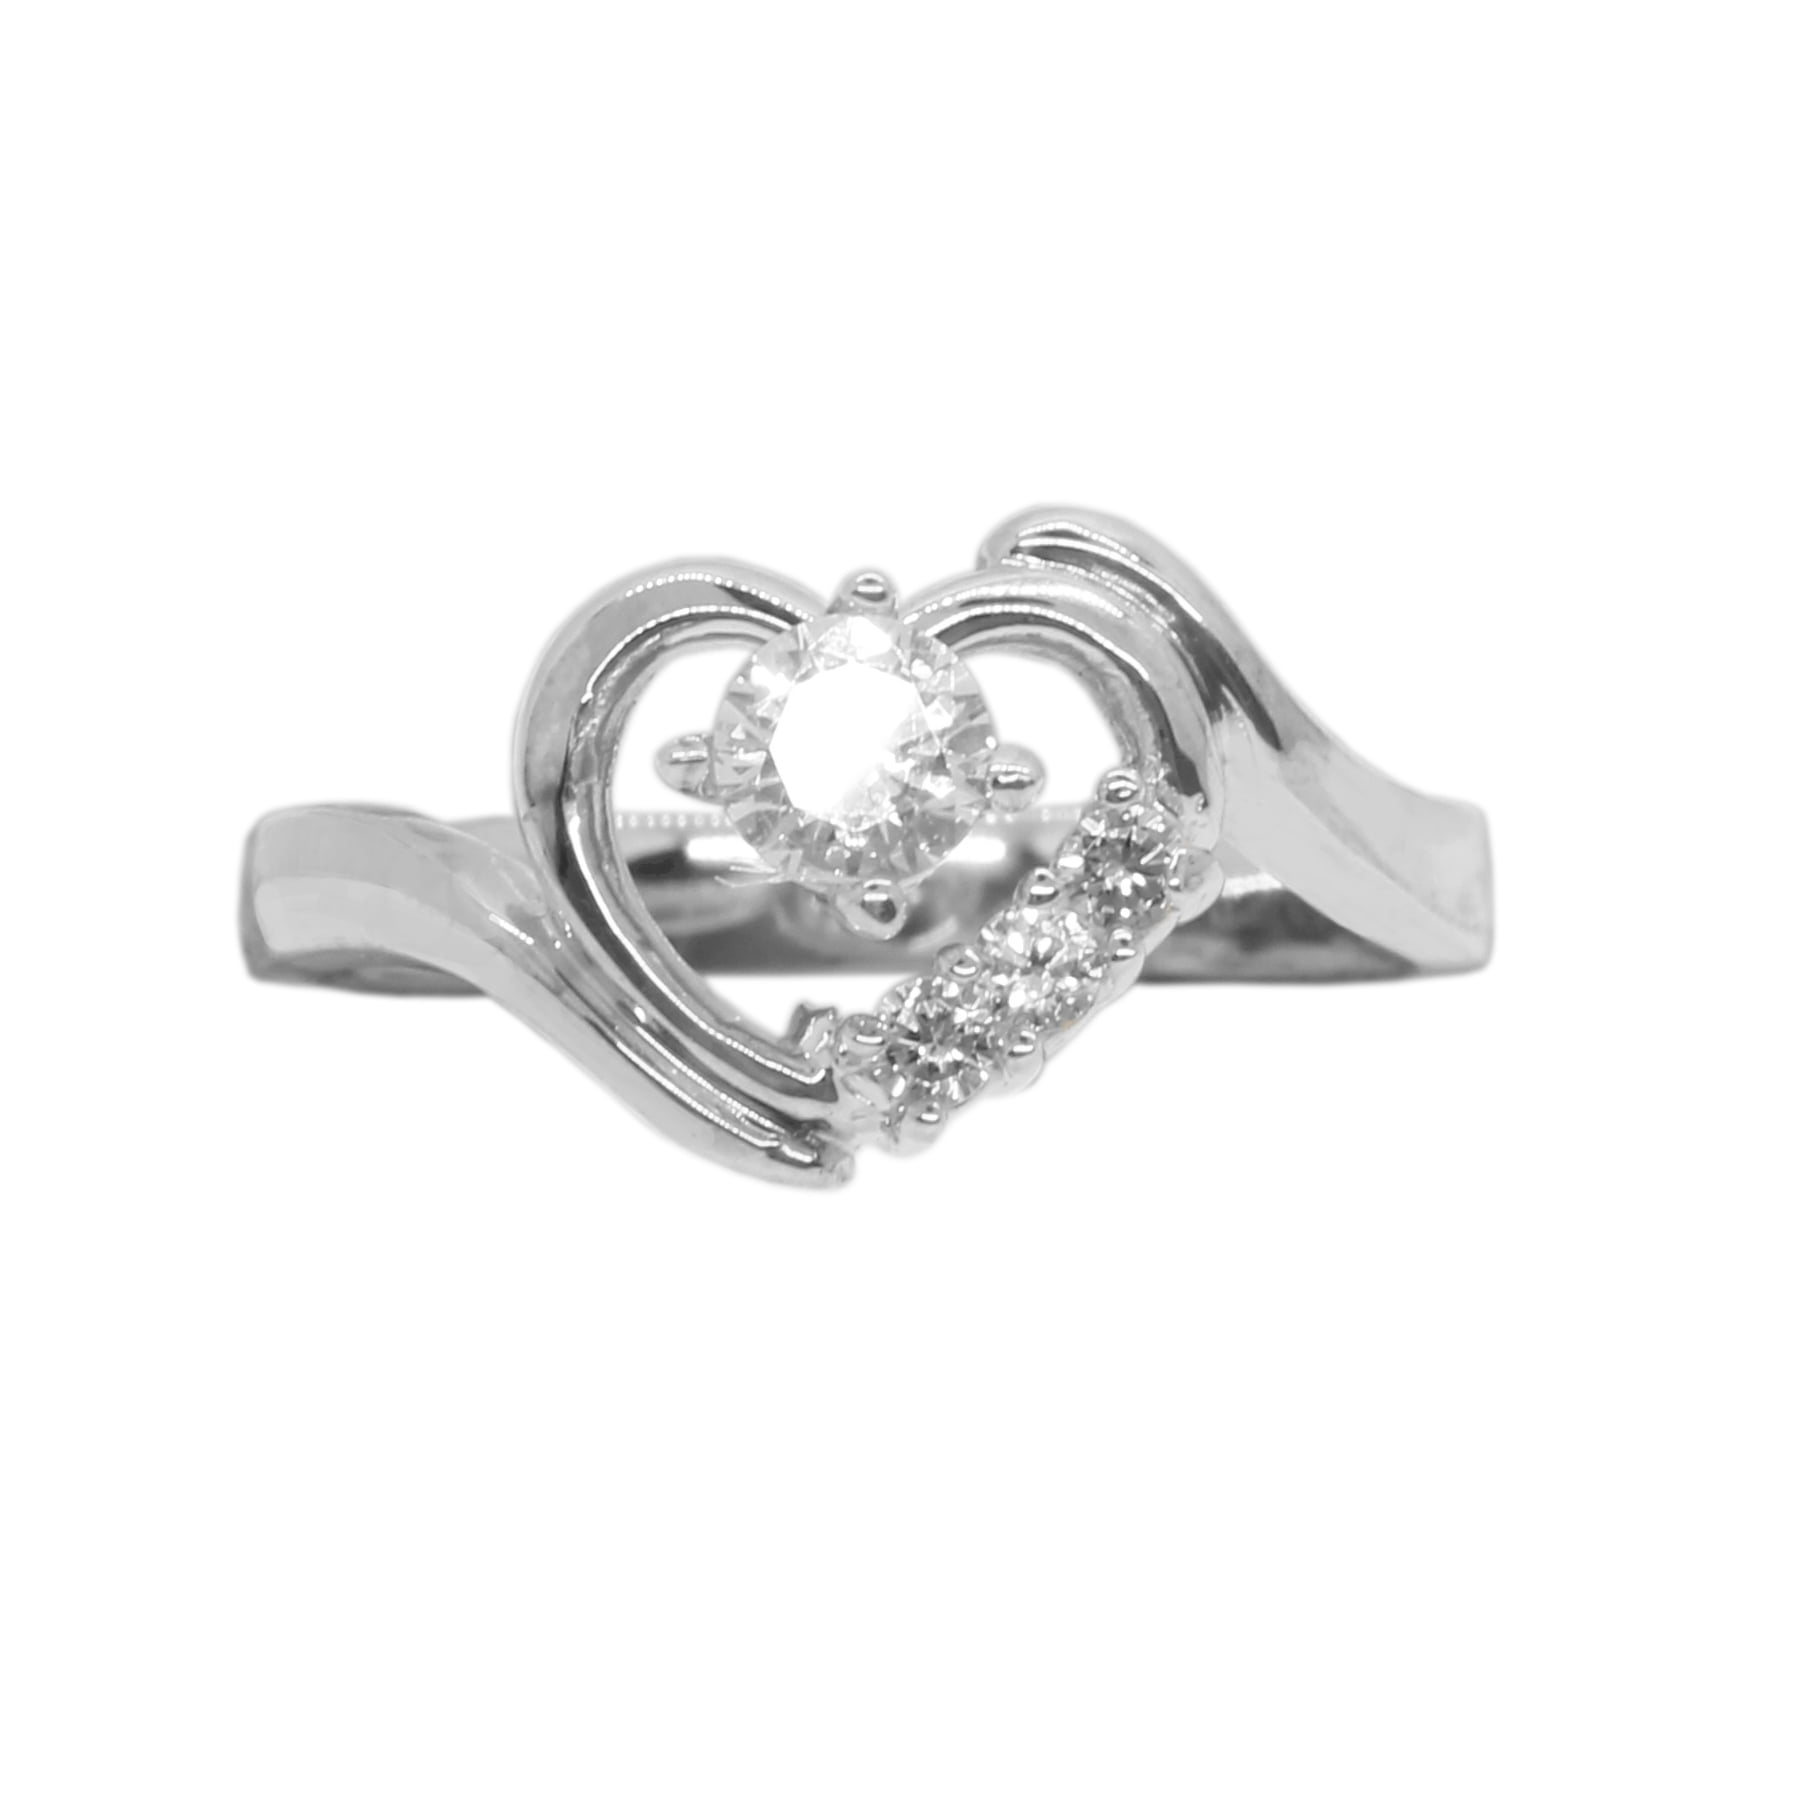 Details about   ARTISAN CRAFTED 92.5 STERLING SILVER CLEAR CUBIC ZIRCONIA SOLITAIRE RING SIZE 5 